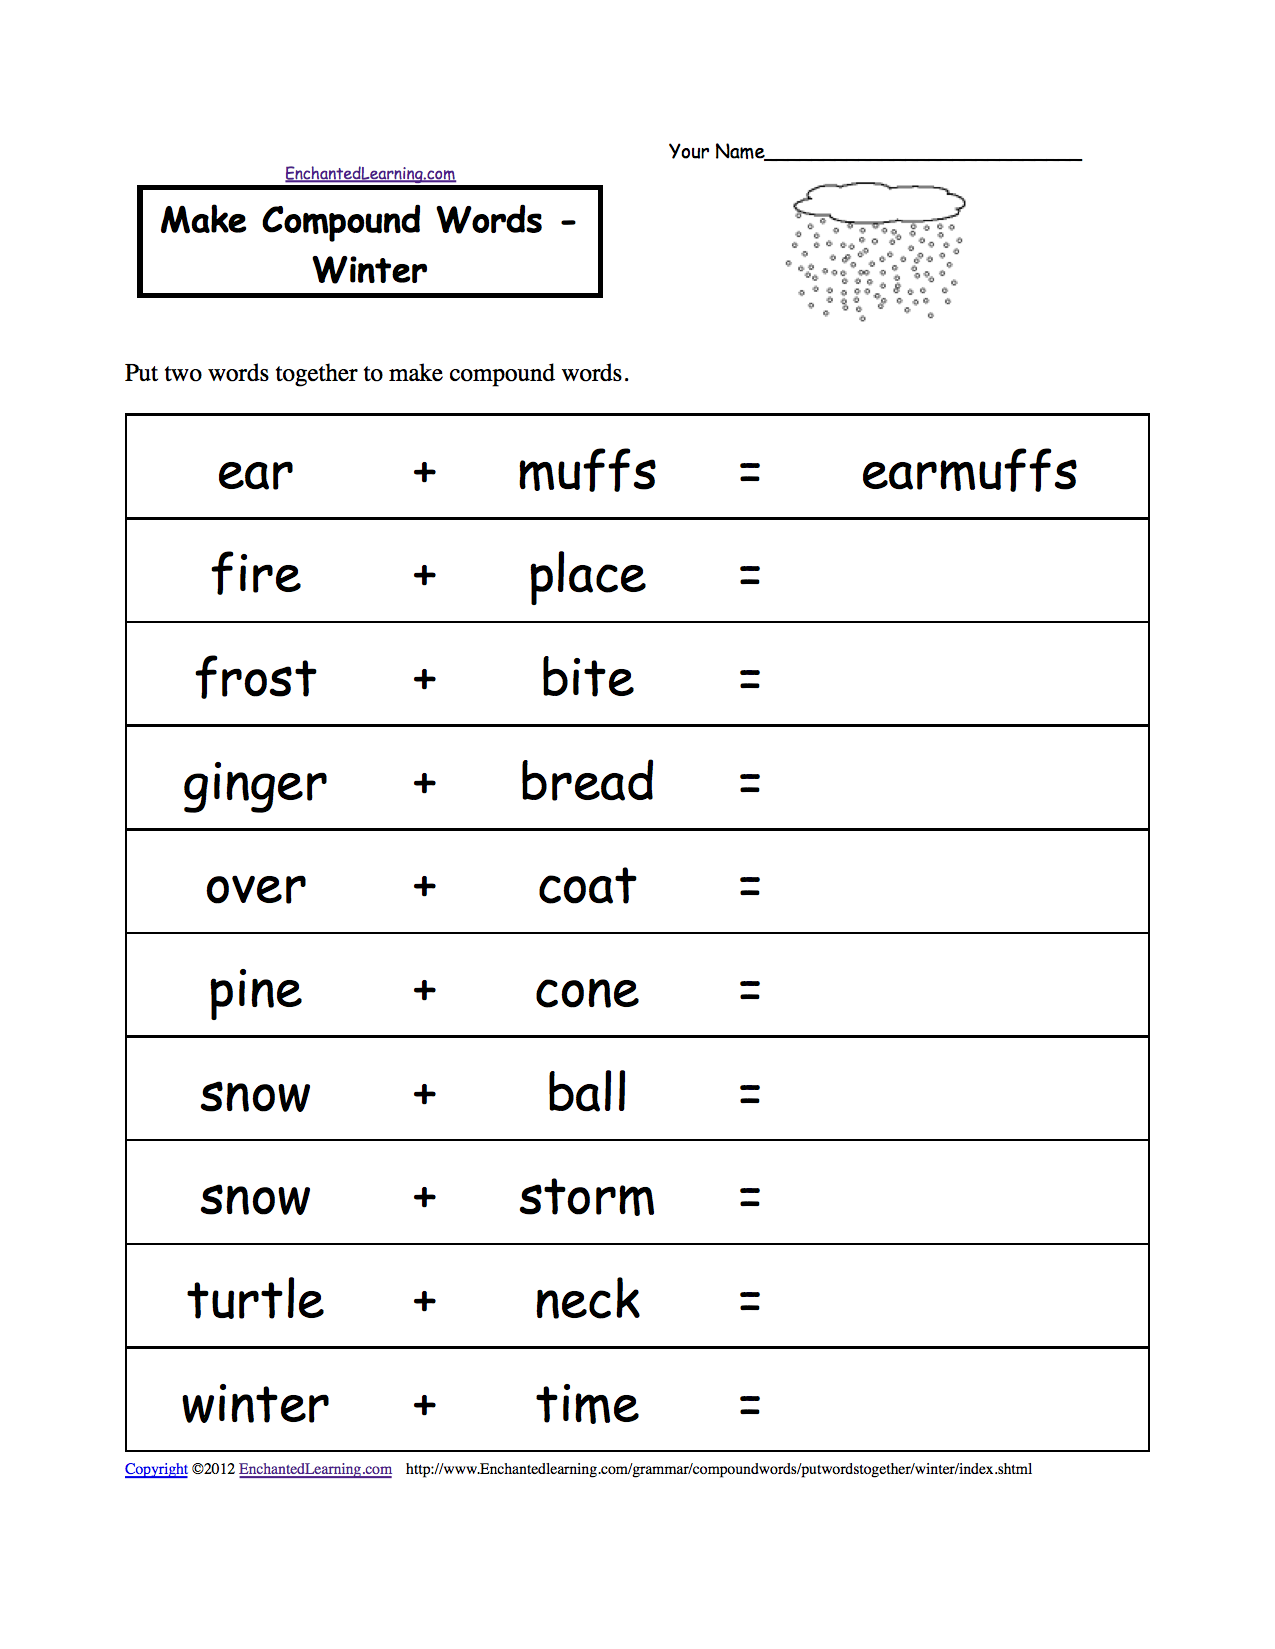 worksheets Theme 3 EnchantedLearning.com Spelling weather K Page Worksheets: Winter winter at